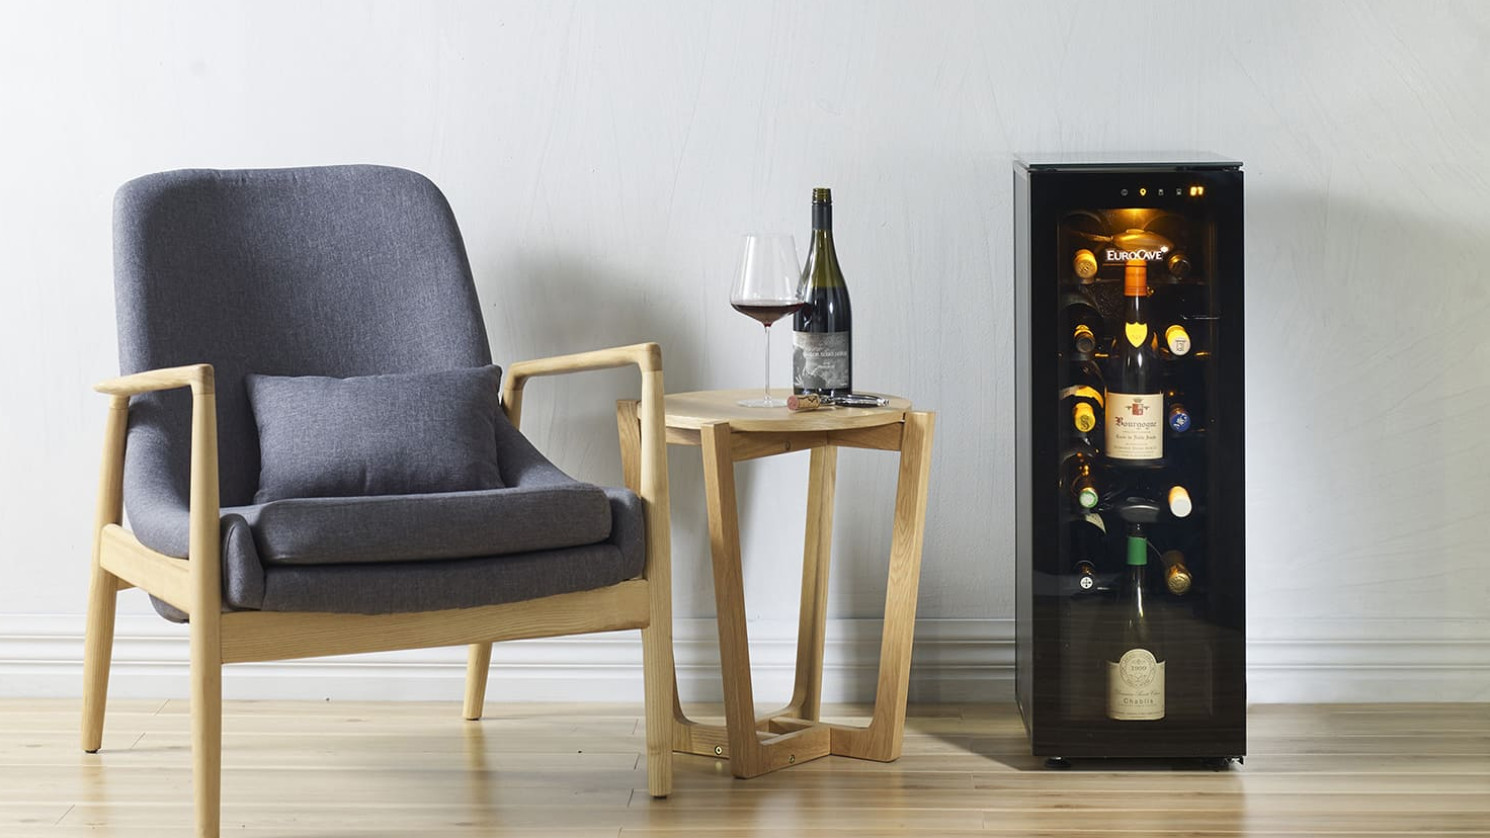 Mini size wine bar perfect for a lounge area, a tasting room, a luxury hotel suite. Essential equipment for an exceptional customer experience.